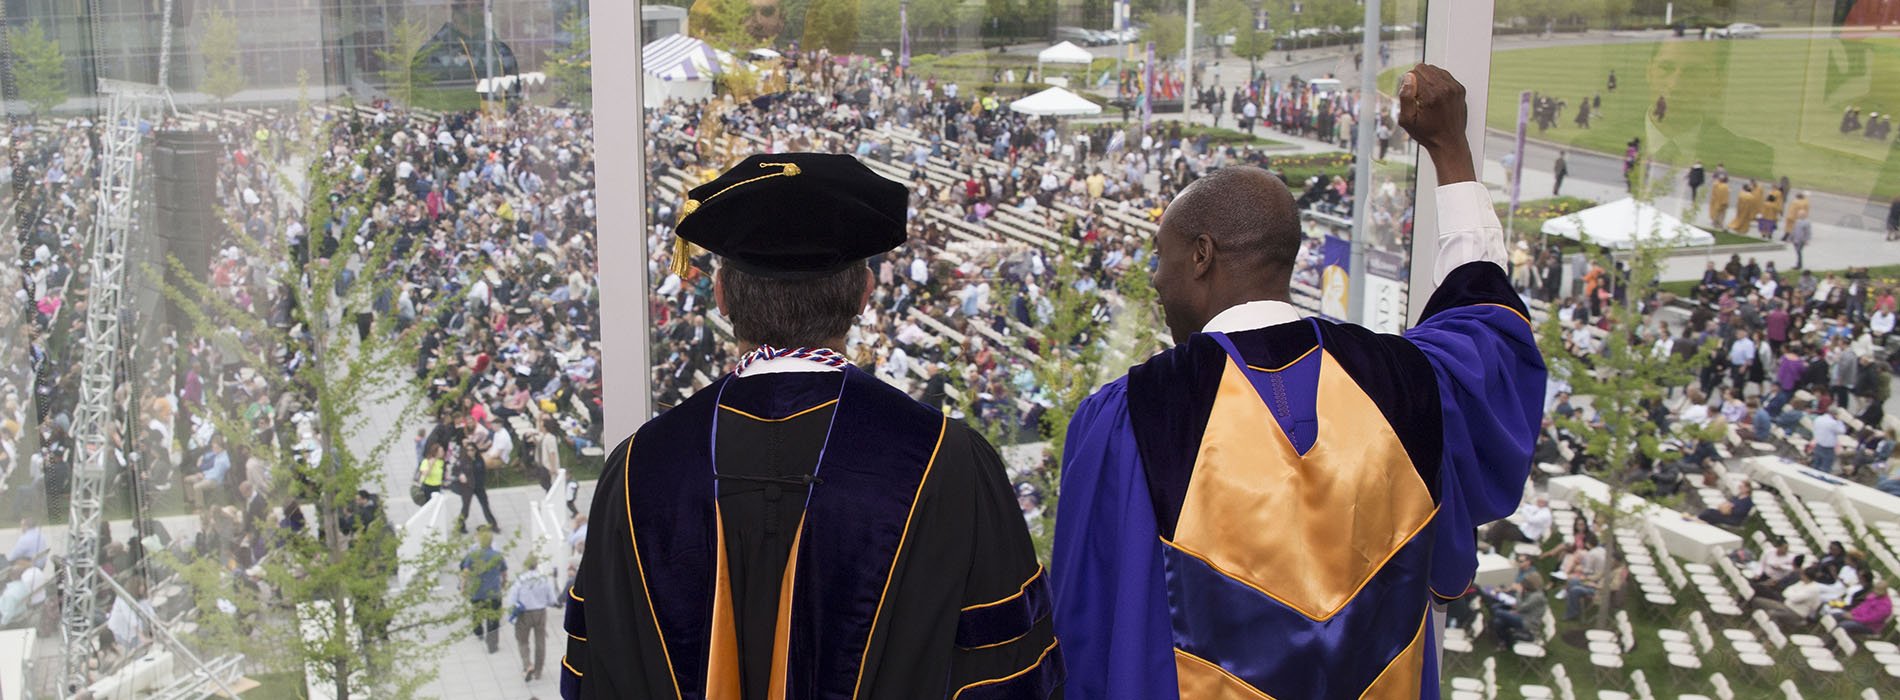 University President and CIO at 2018 Commencement